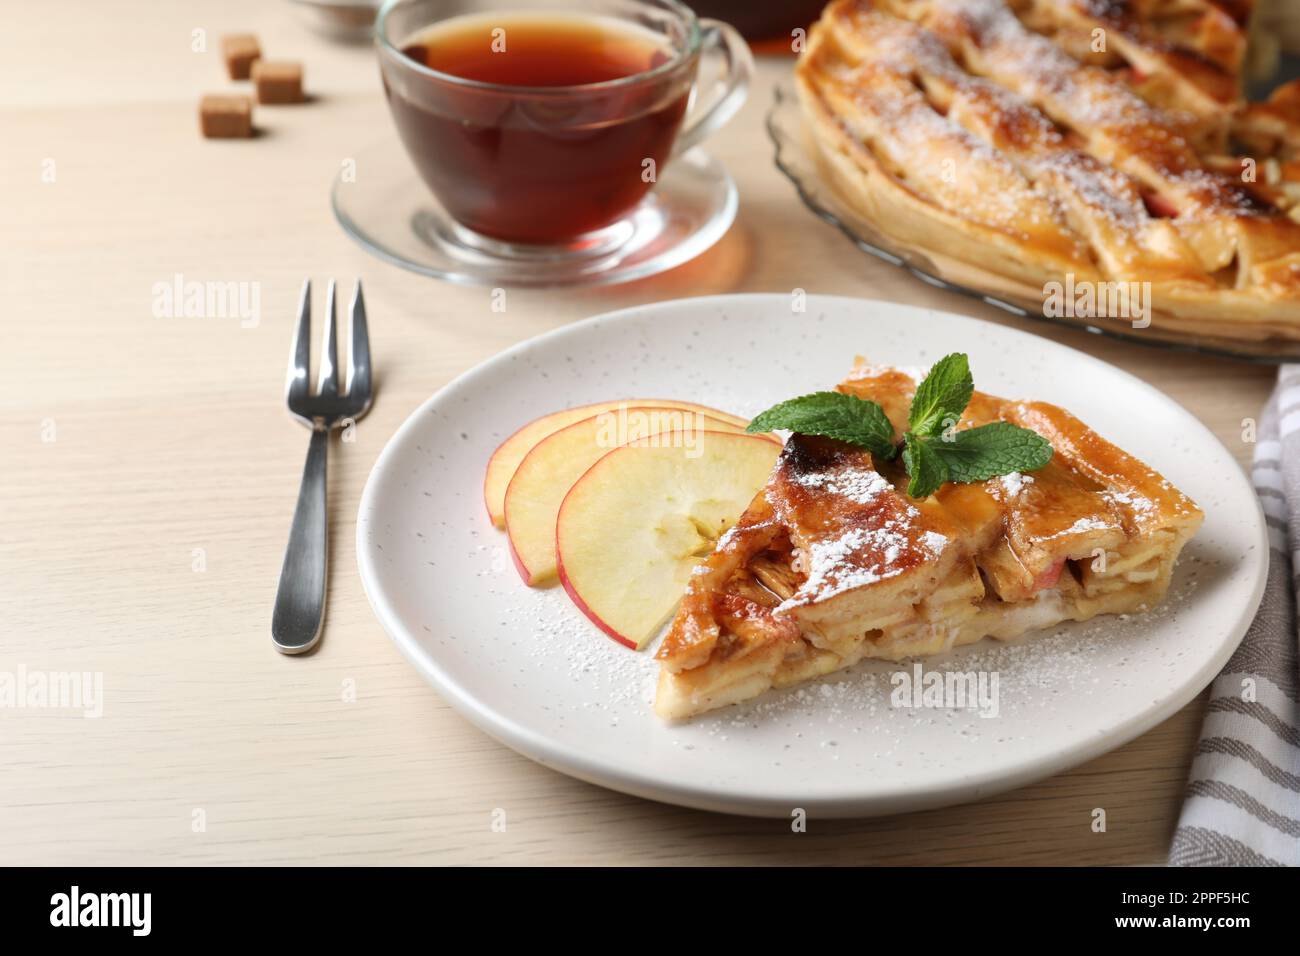 Slice of traditional apple pie served on wooden table Stock Photo